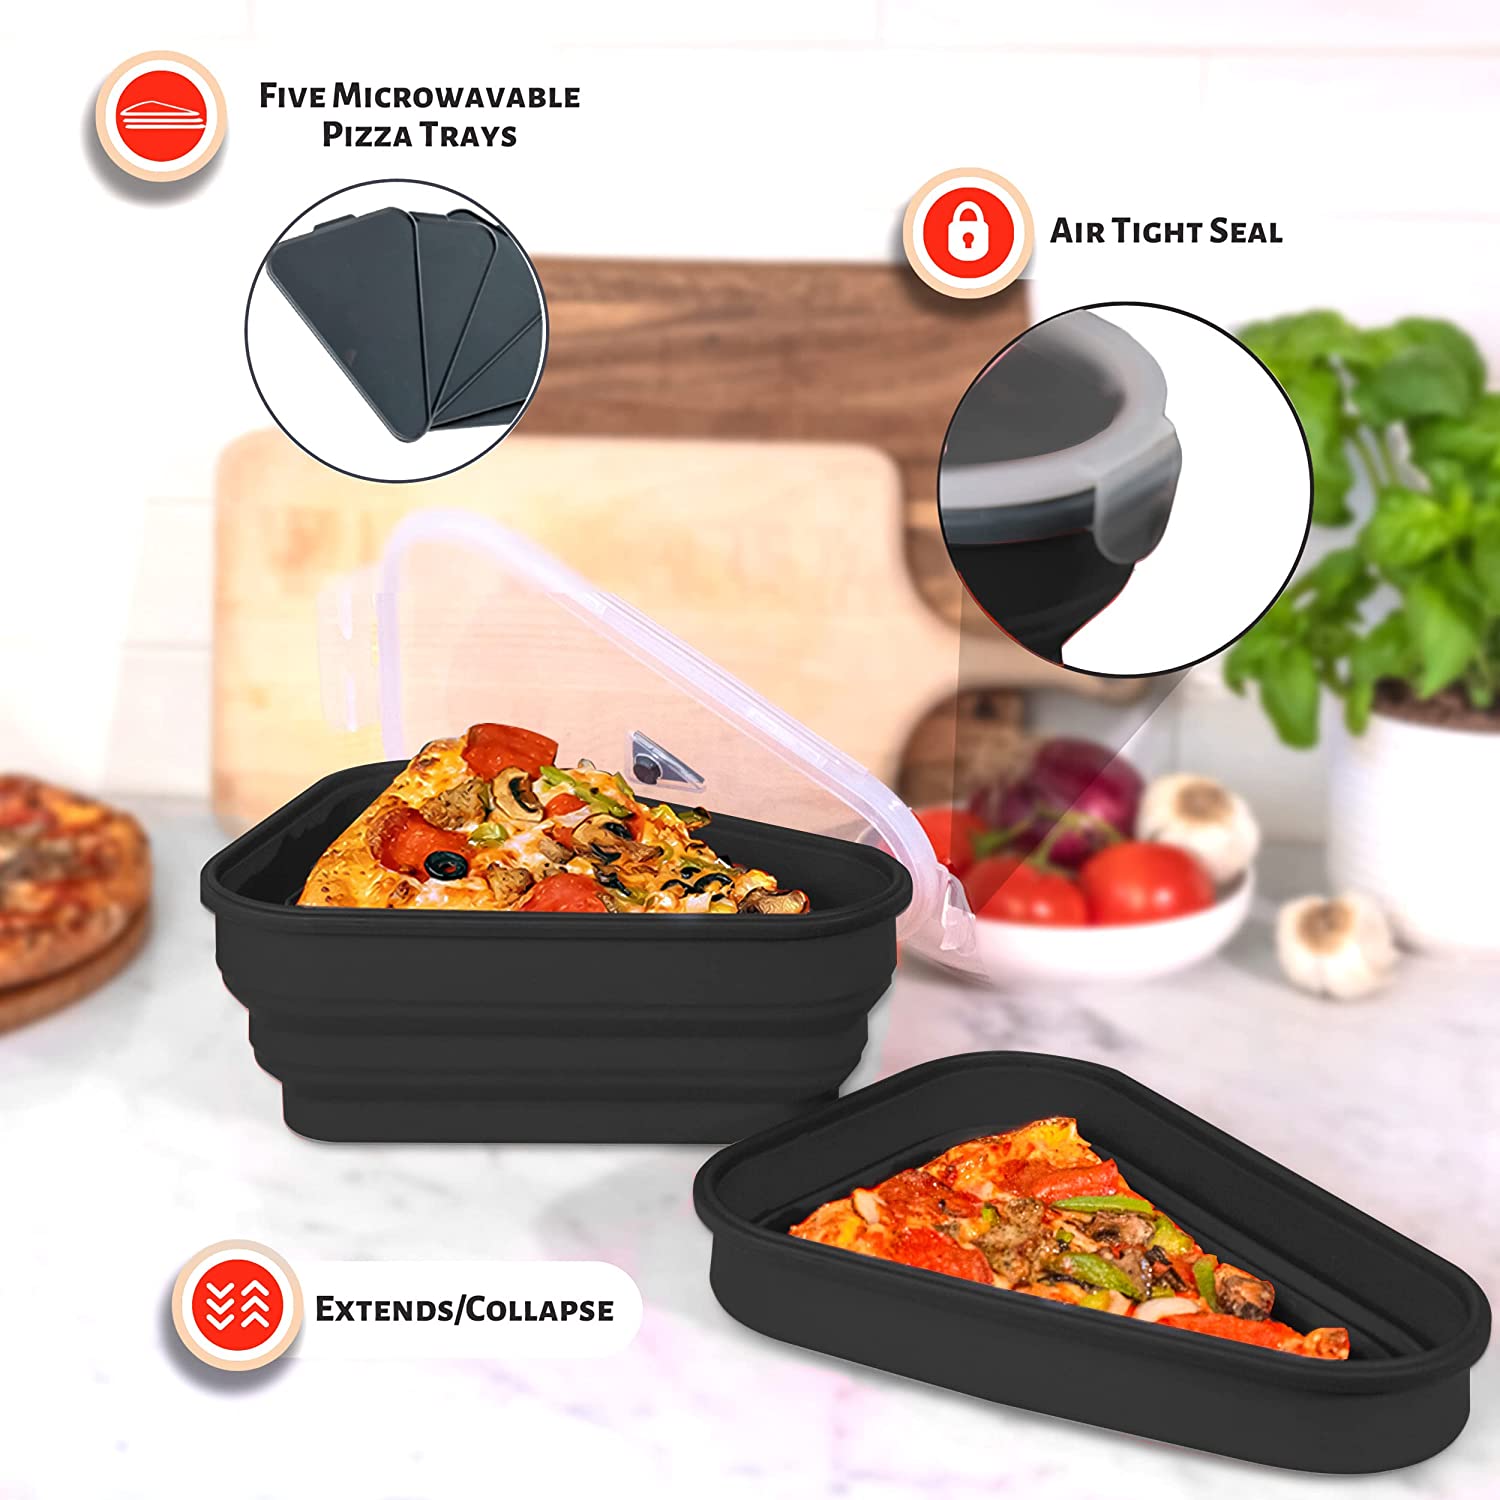 pizza storage container, pizza storage container Suppliers and  Manufacturers at